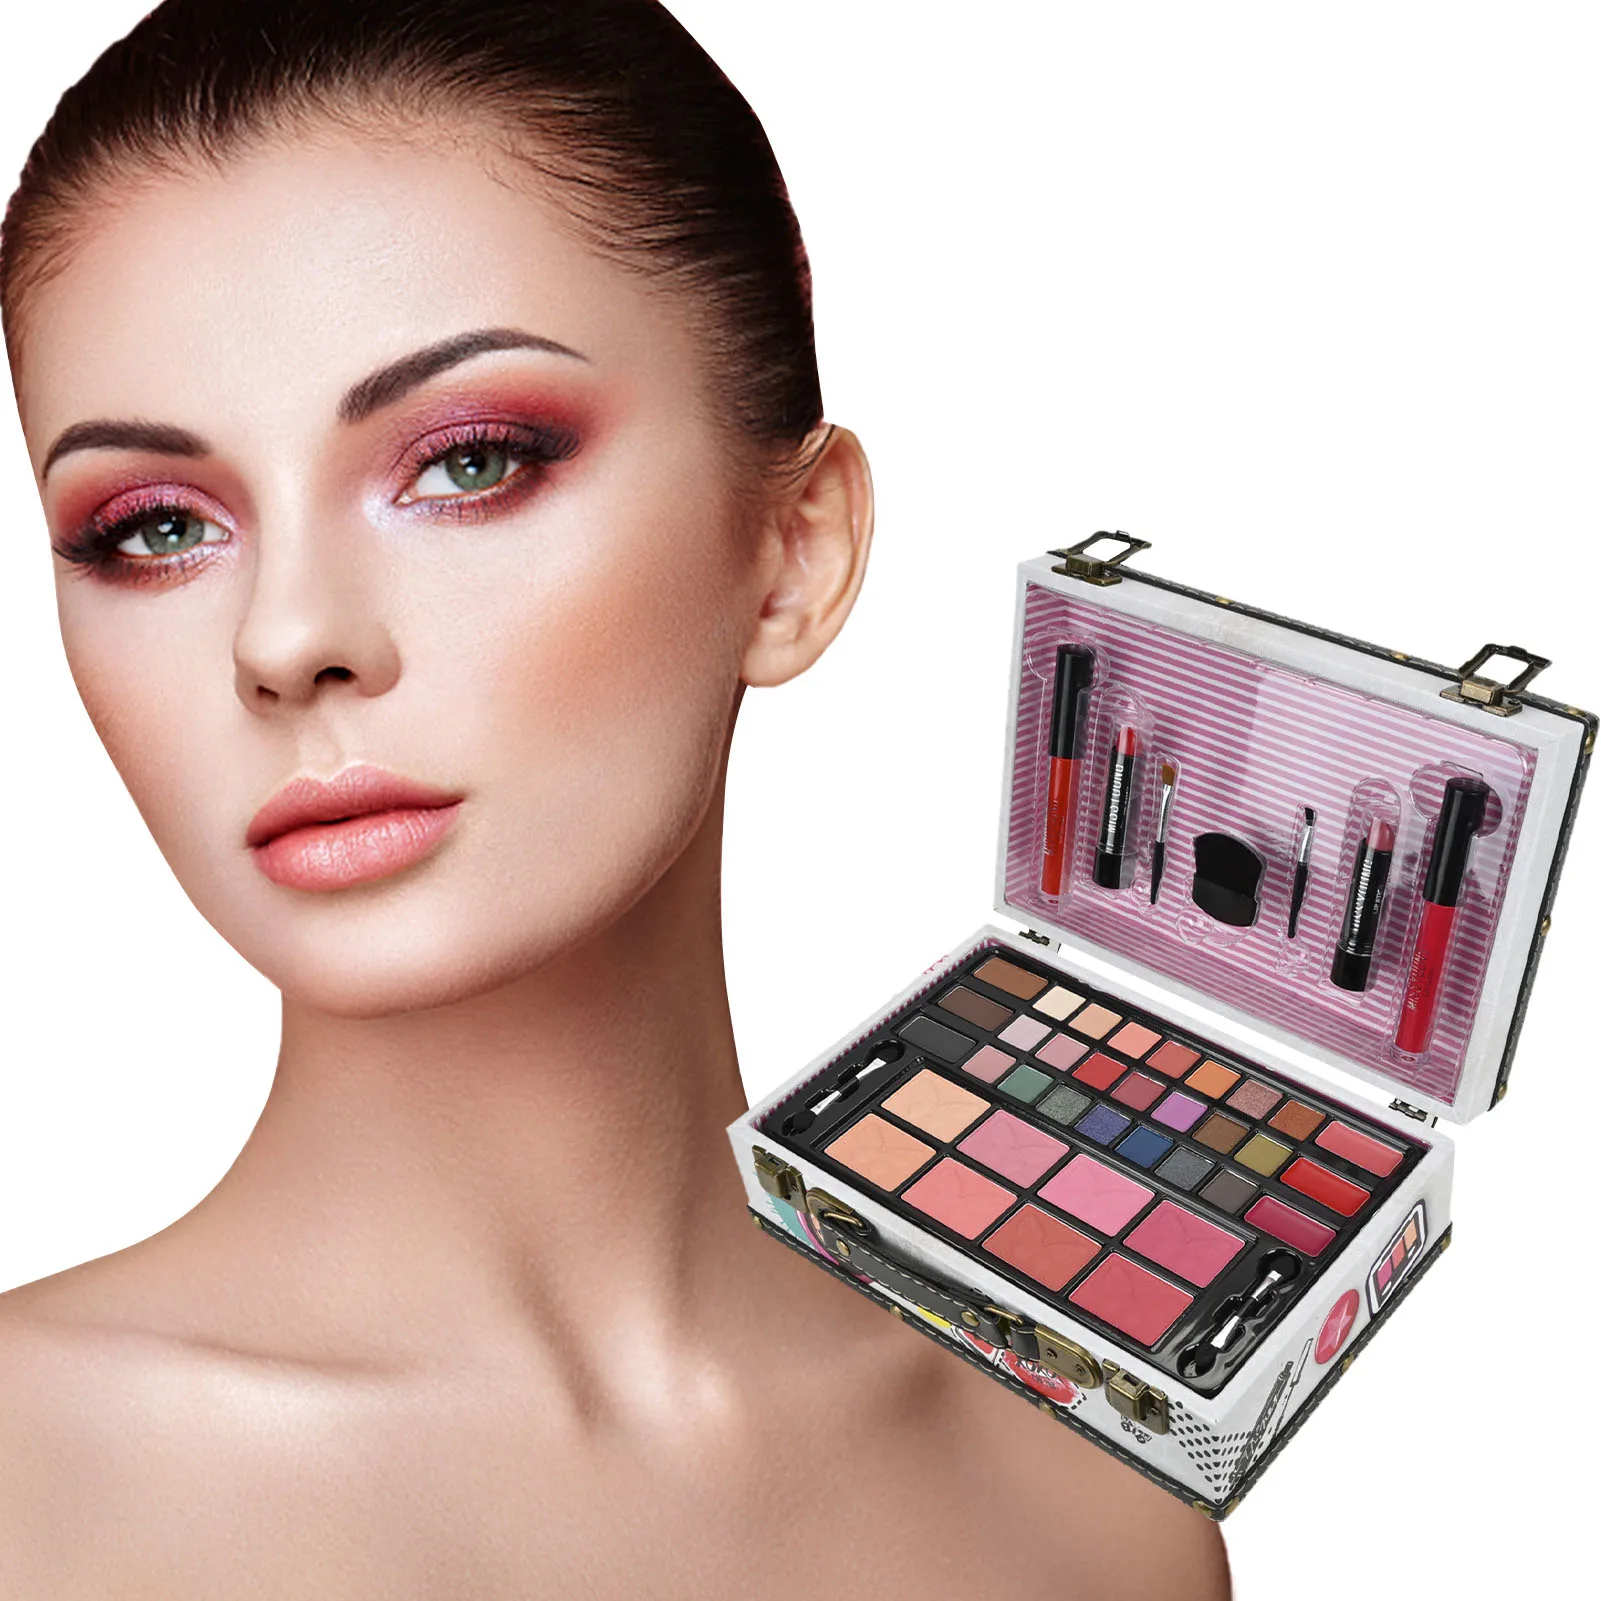 44pcs Makeup Palette With Portable Case All-in-One Cosmetics Case Make Up Set With Eyeshadow Lipstick Blush All-in-One Make Up